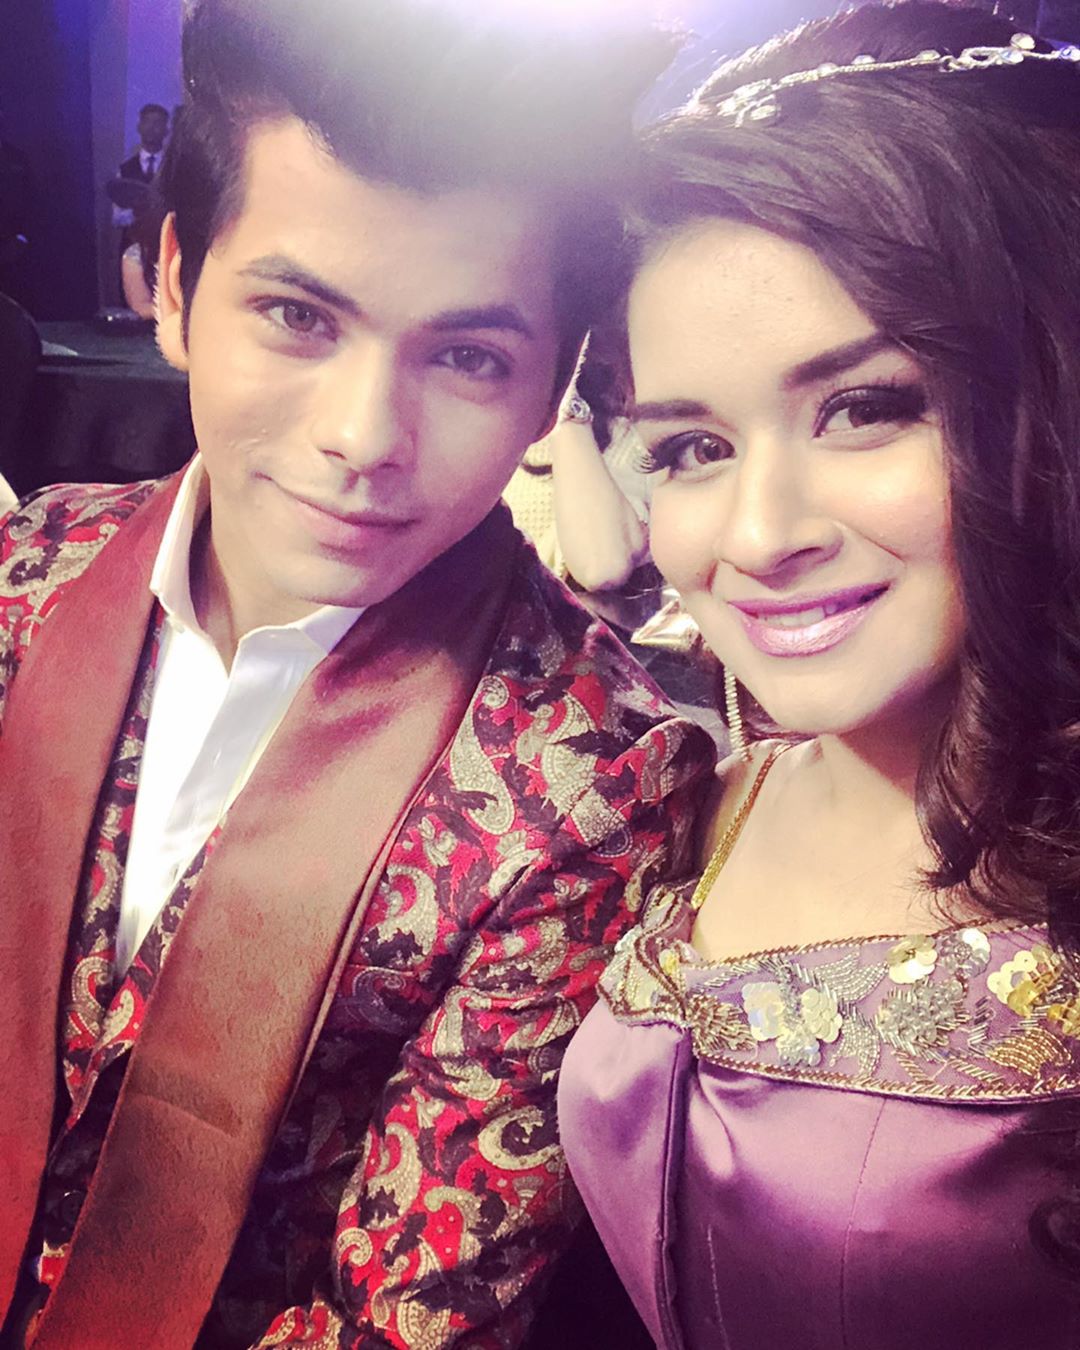 Siddharth Nigam And Avneet Kaur Together Are A Treat To Watch Video